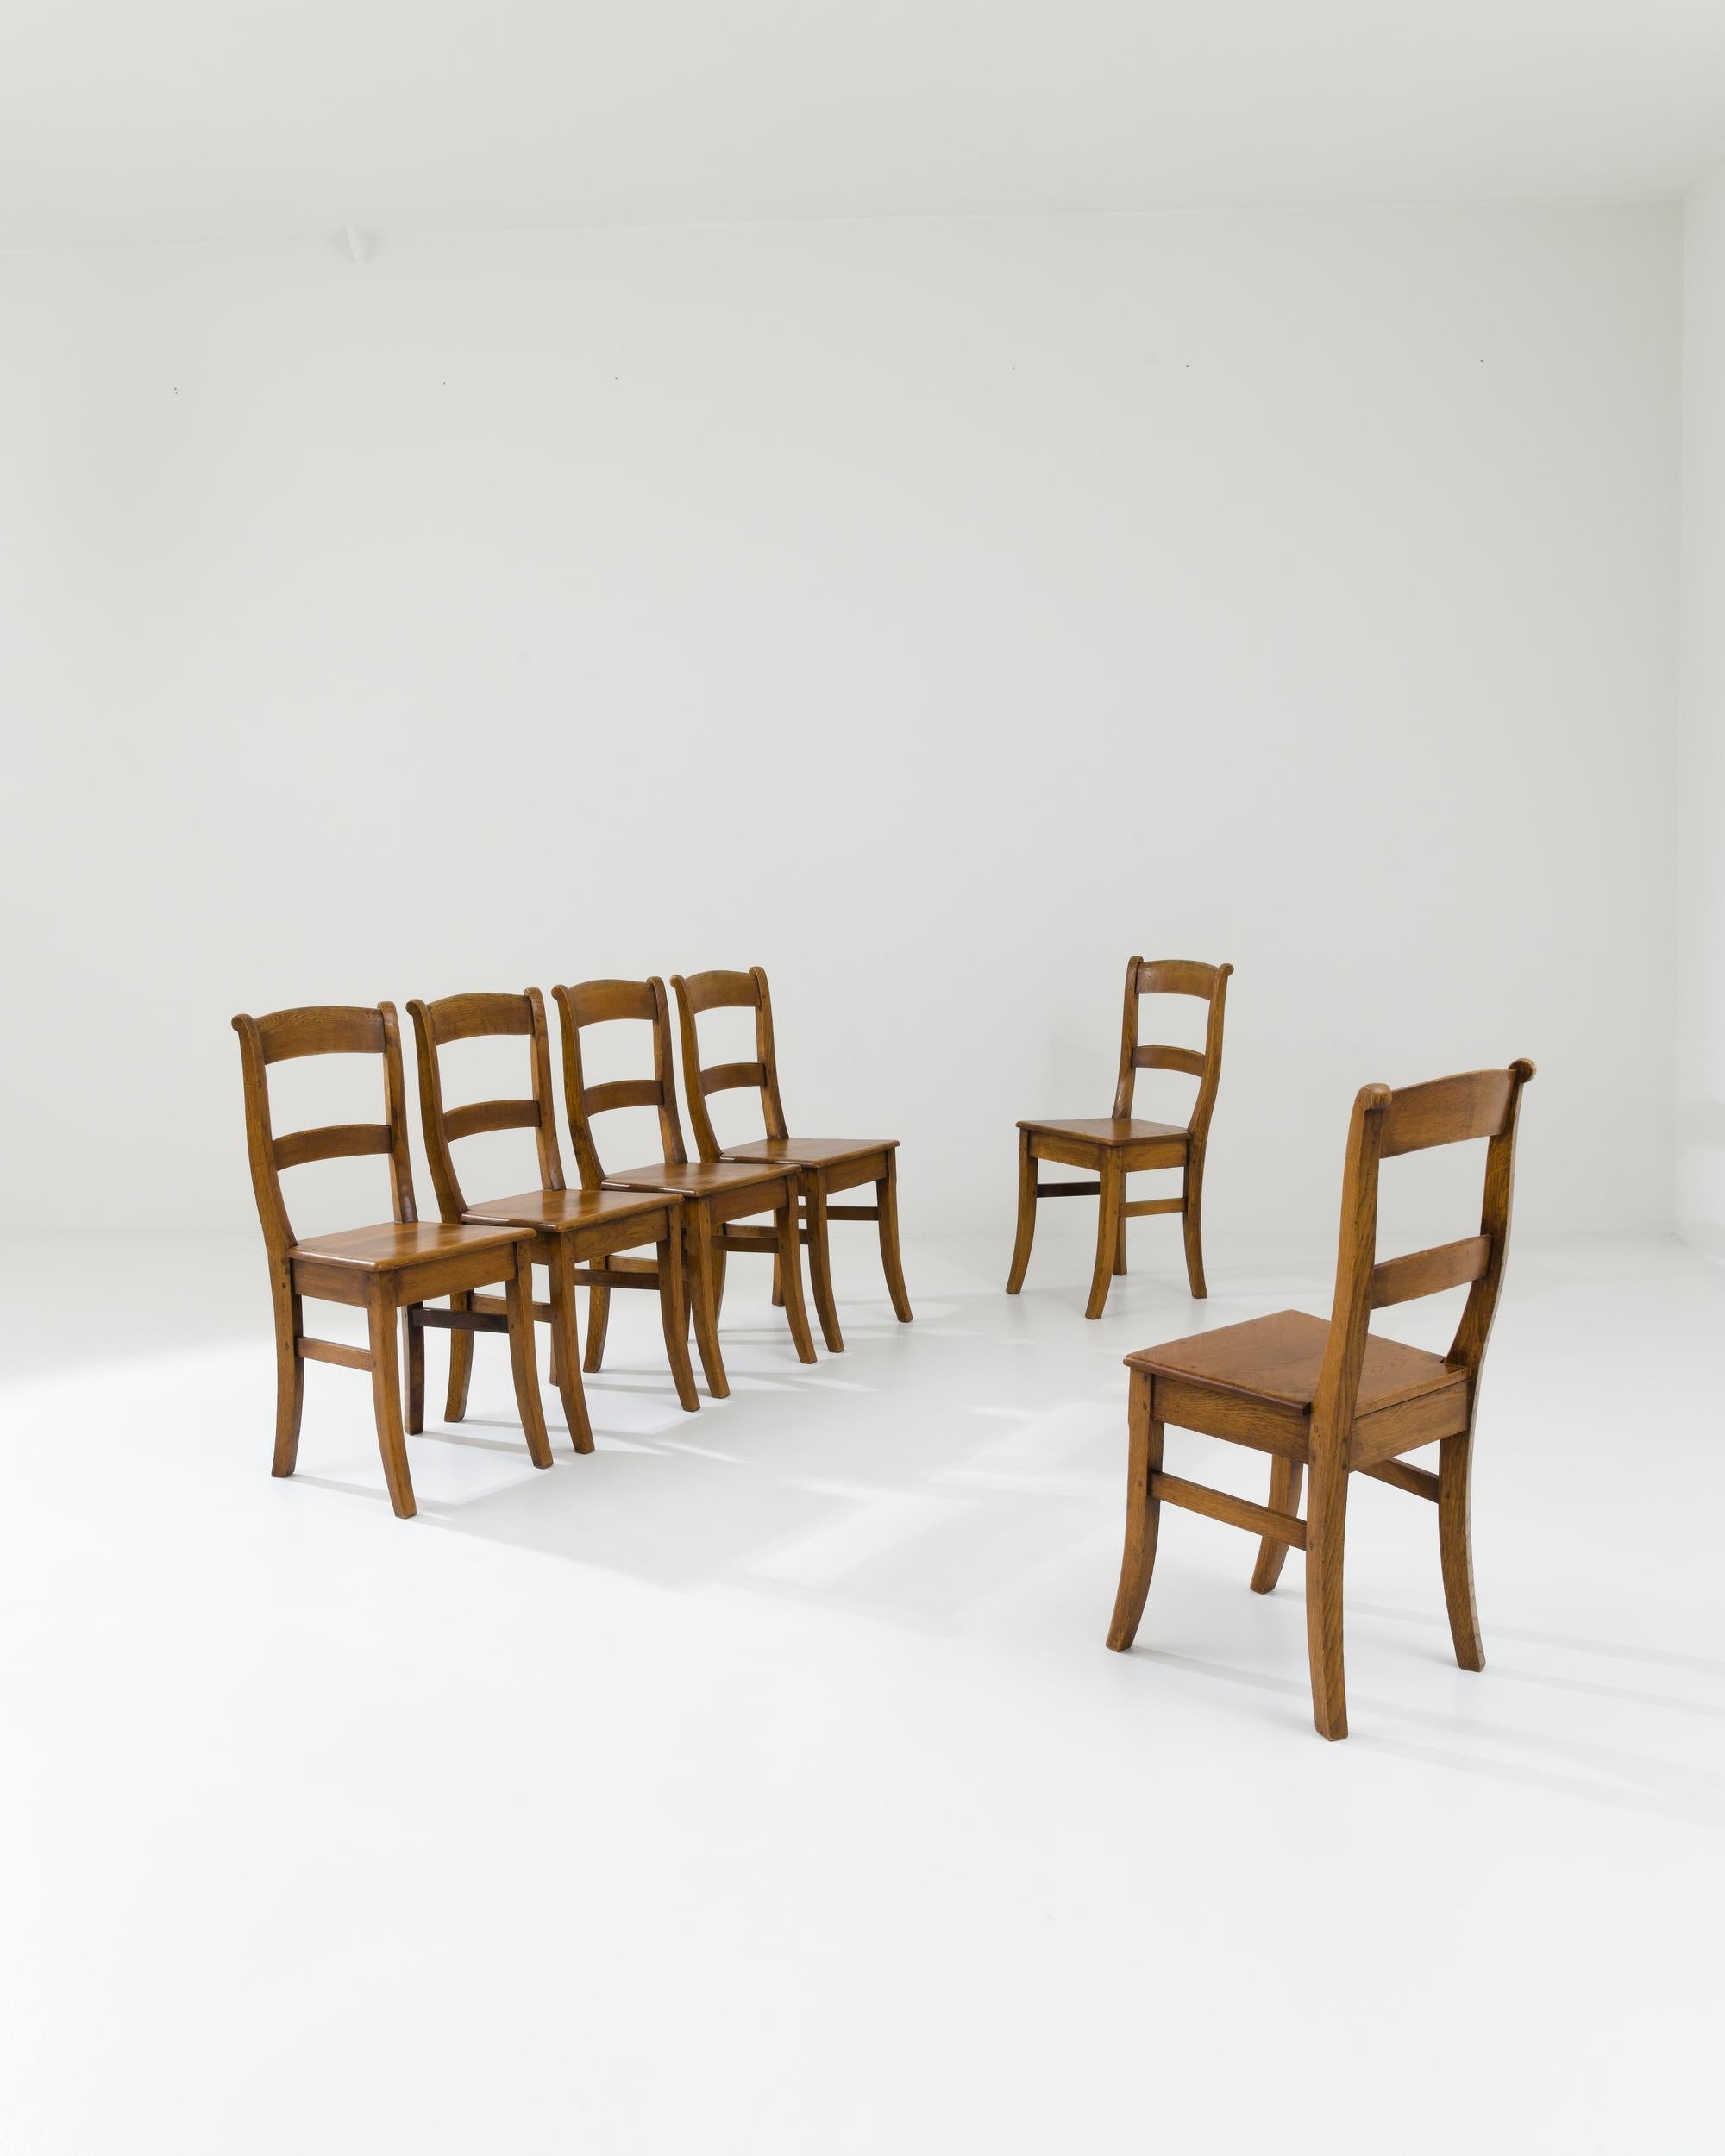 A set of wooden dining chairs made in 20th century Belgium. With swooping seat backs and gracefully bent legs, these chairs exude the grace of simplicity. The high-backed form gives these chairs a scholarly form, the rich brown seats, polished to a